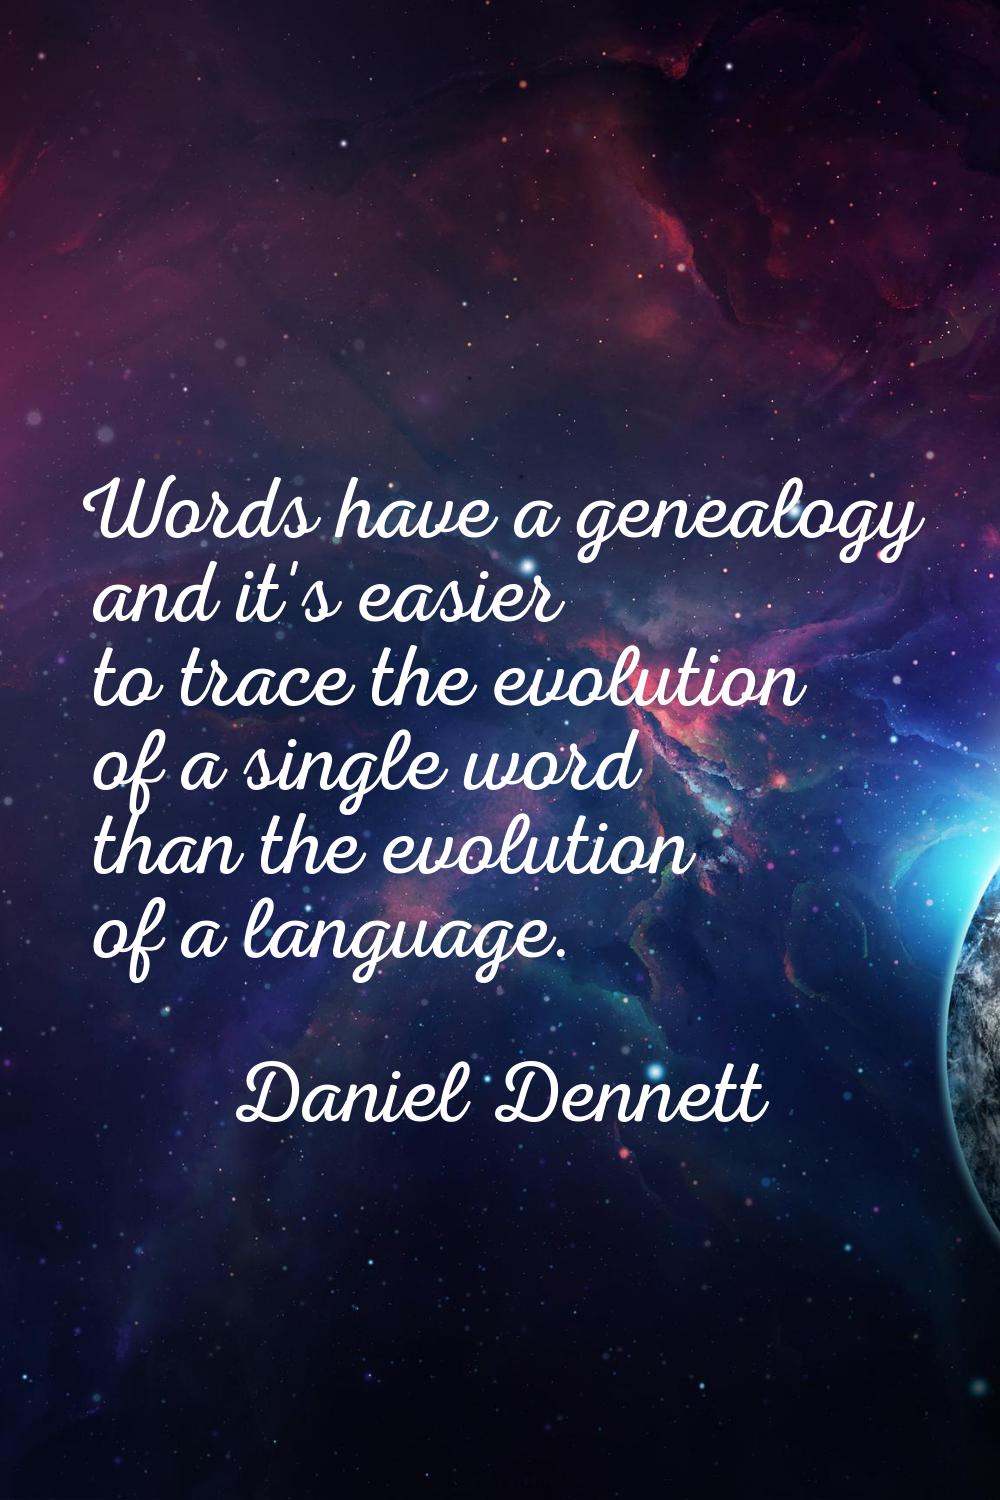 Words have a genealogy and it's easier to trace the evolution of a single word than the evolution o